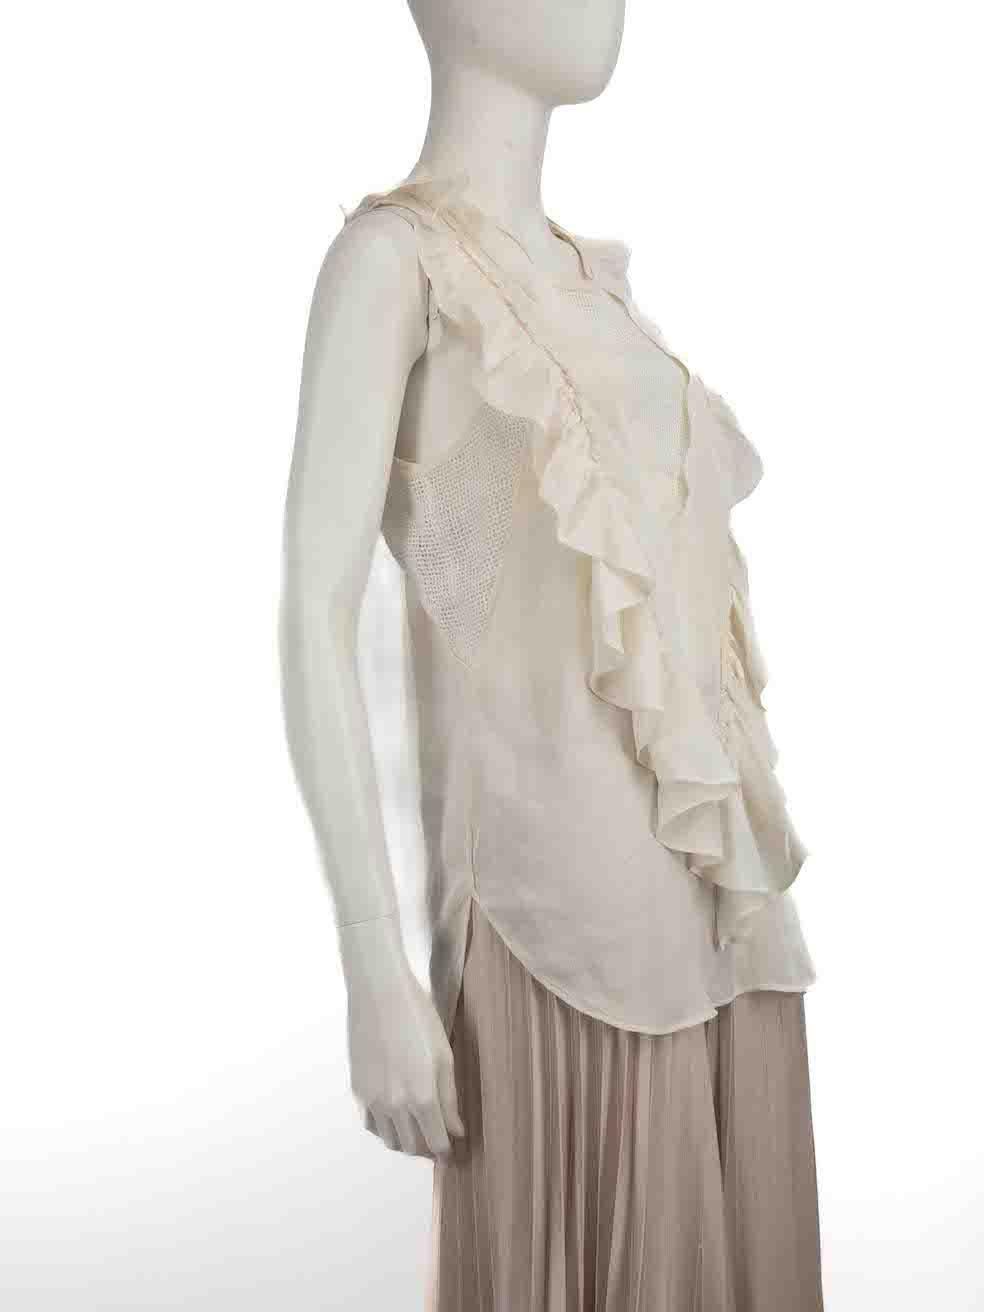 CONDITION is Good. Minor wear to top is evident. Light wear to the weave with some plucks and pulls seen throughout, particularly on the raw edge detailing of this used Isabel Marant designer resale item.
 
 Details
 White
 Cotton
 Top
 Sleeveless
